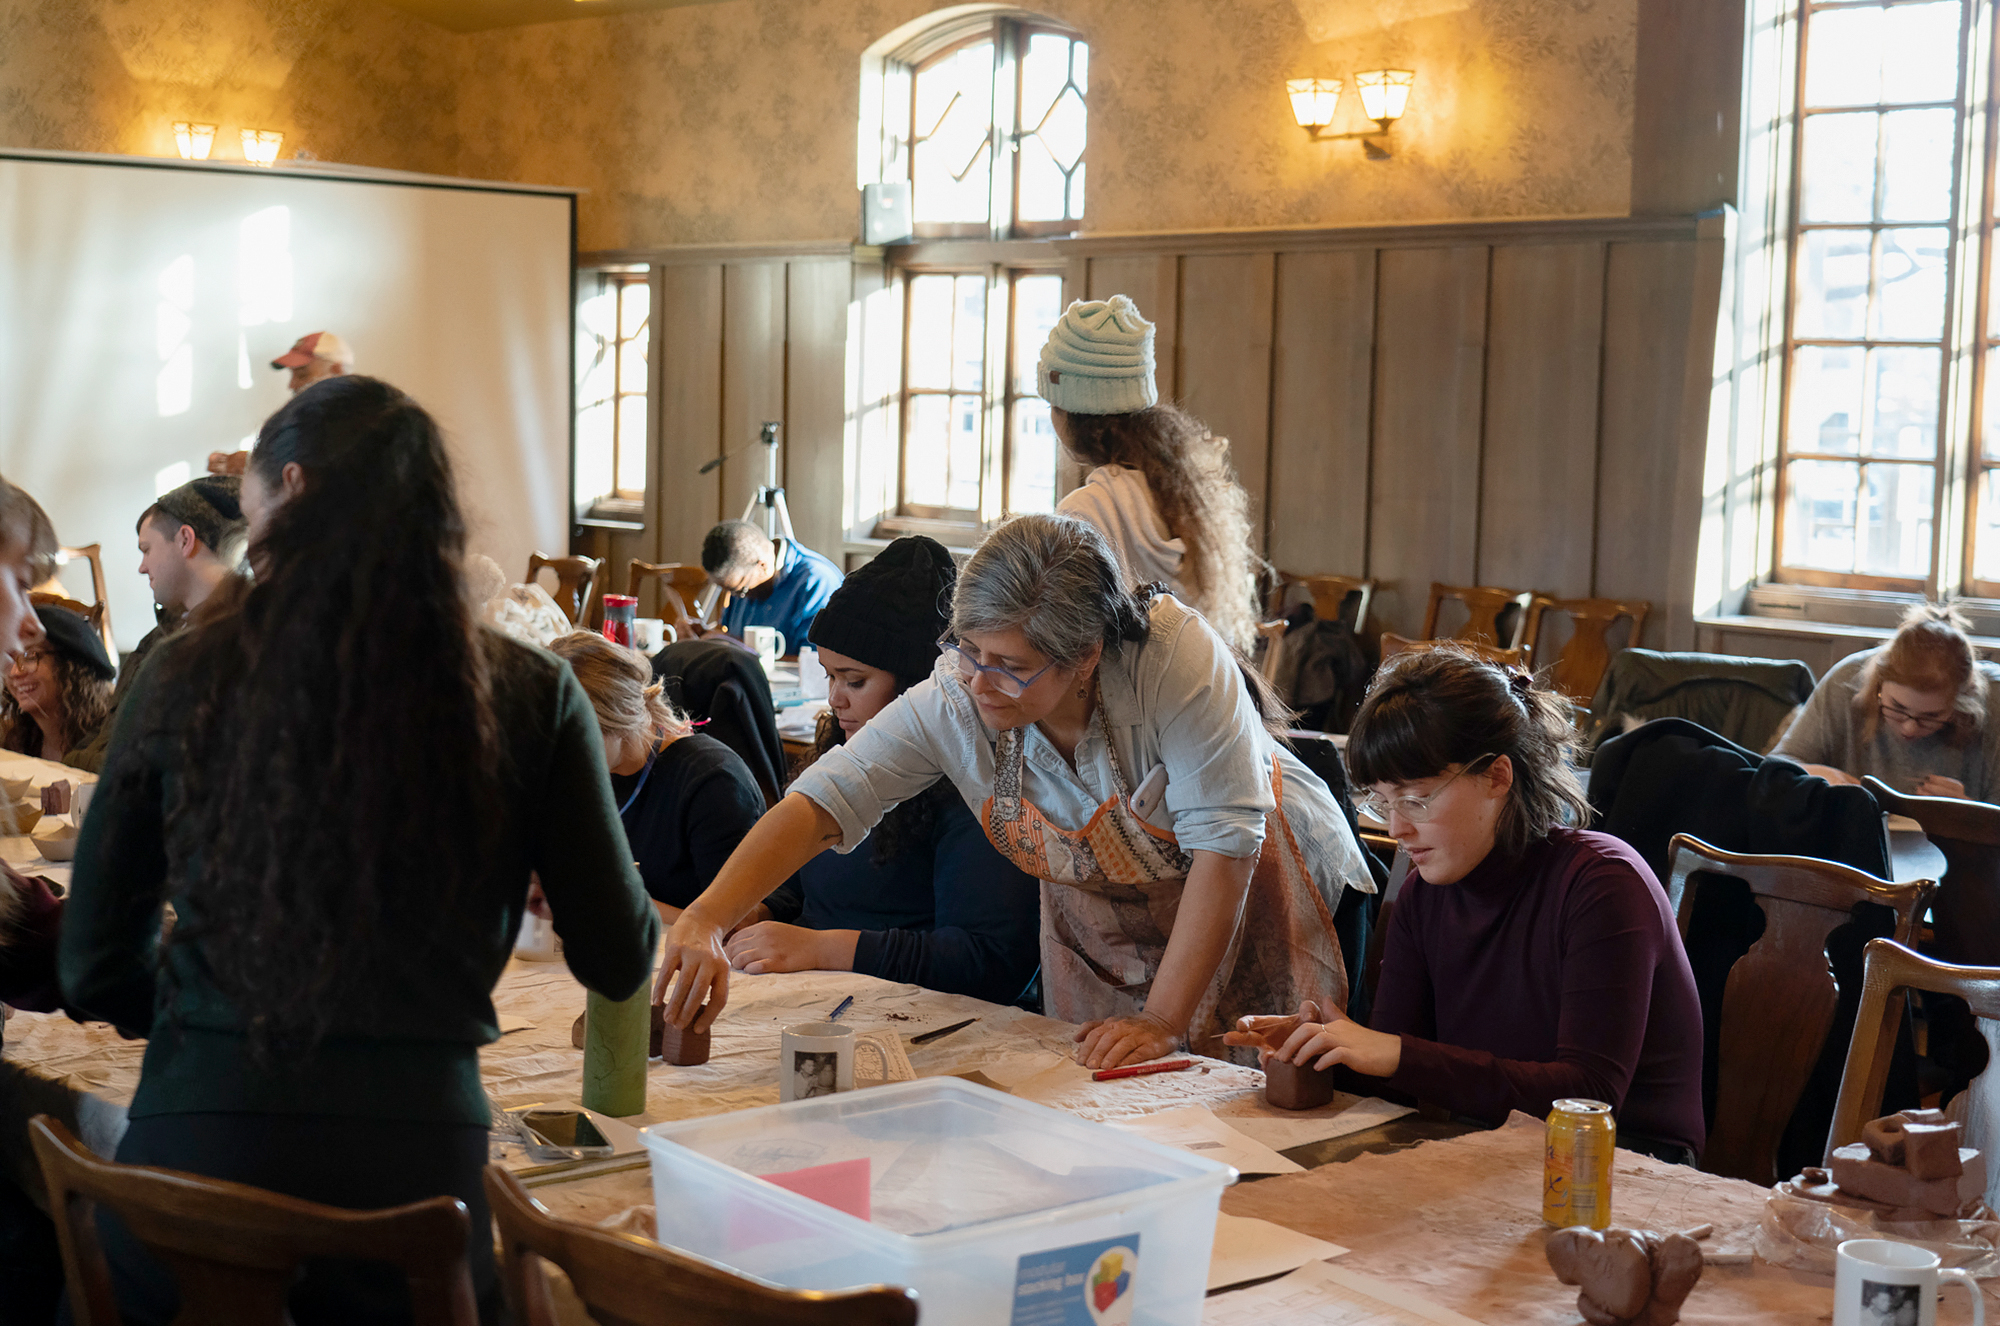 Image: Nicole Marroquin (standing at center, with shirt sleeves rolled up) leads a ceramics workshop at Hull House in November. She is surrounded by participants sitting at tables molding clay into the shapes of buildings. Photo courtesy of Jane Addams Hull-House Museum / Jesse Meredith.